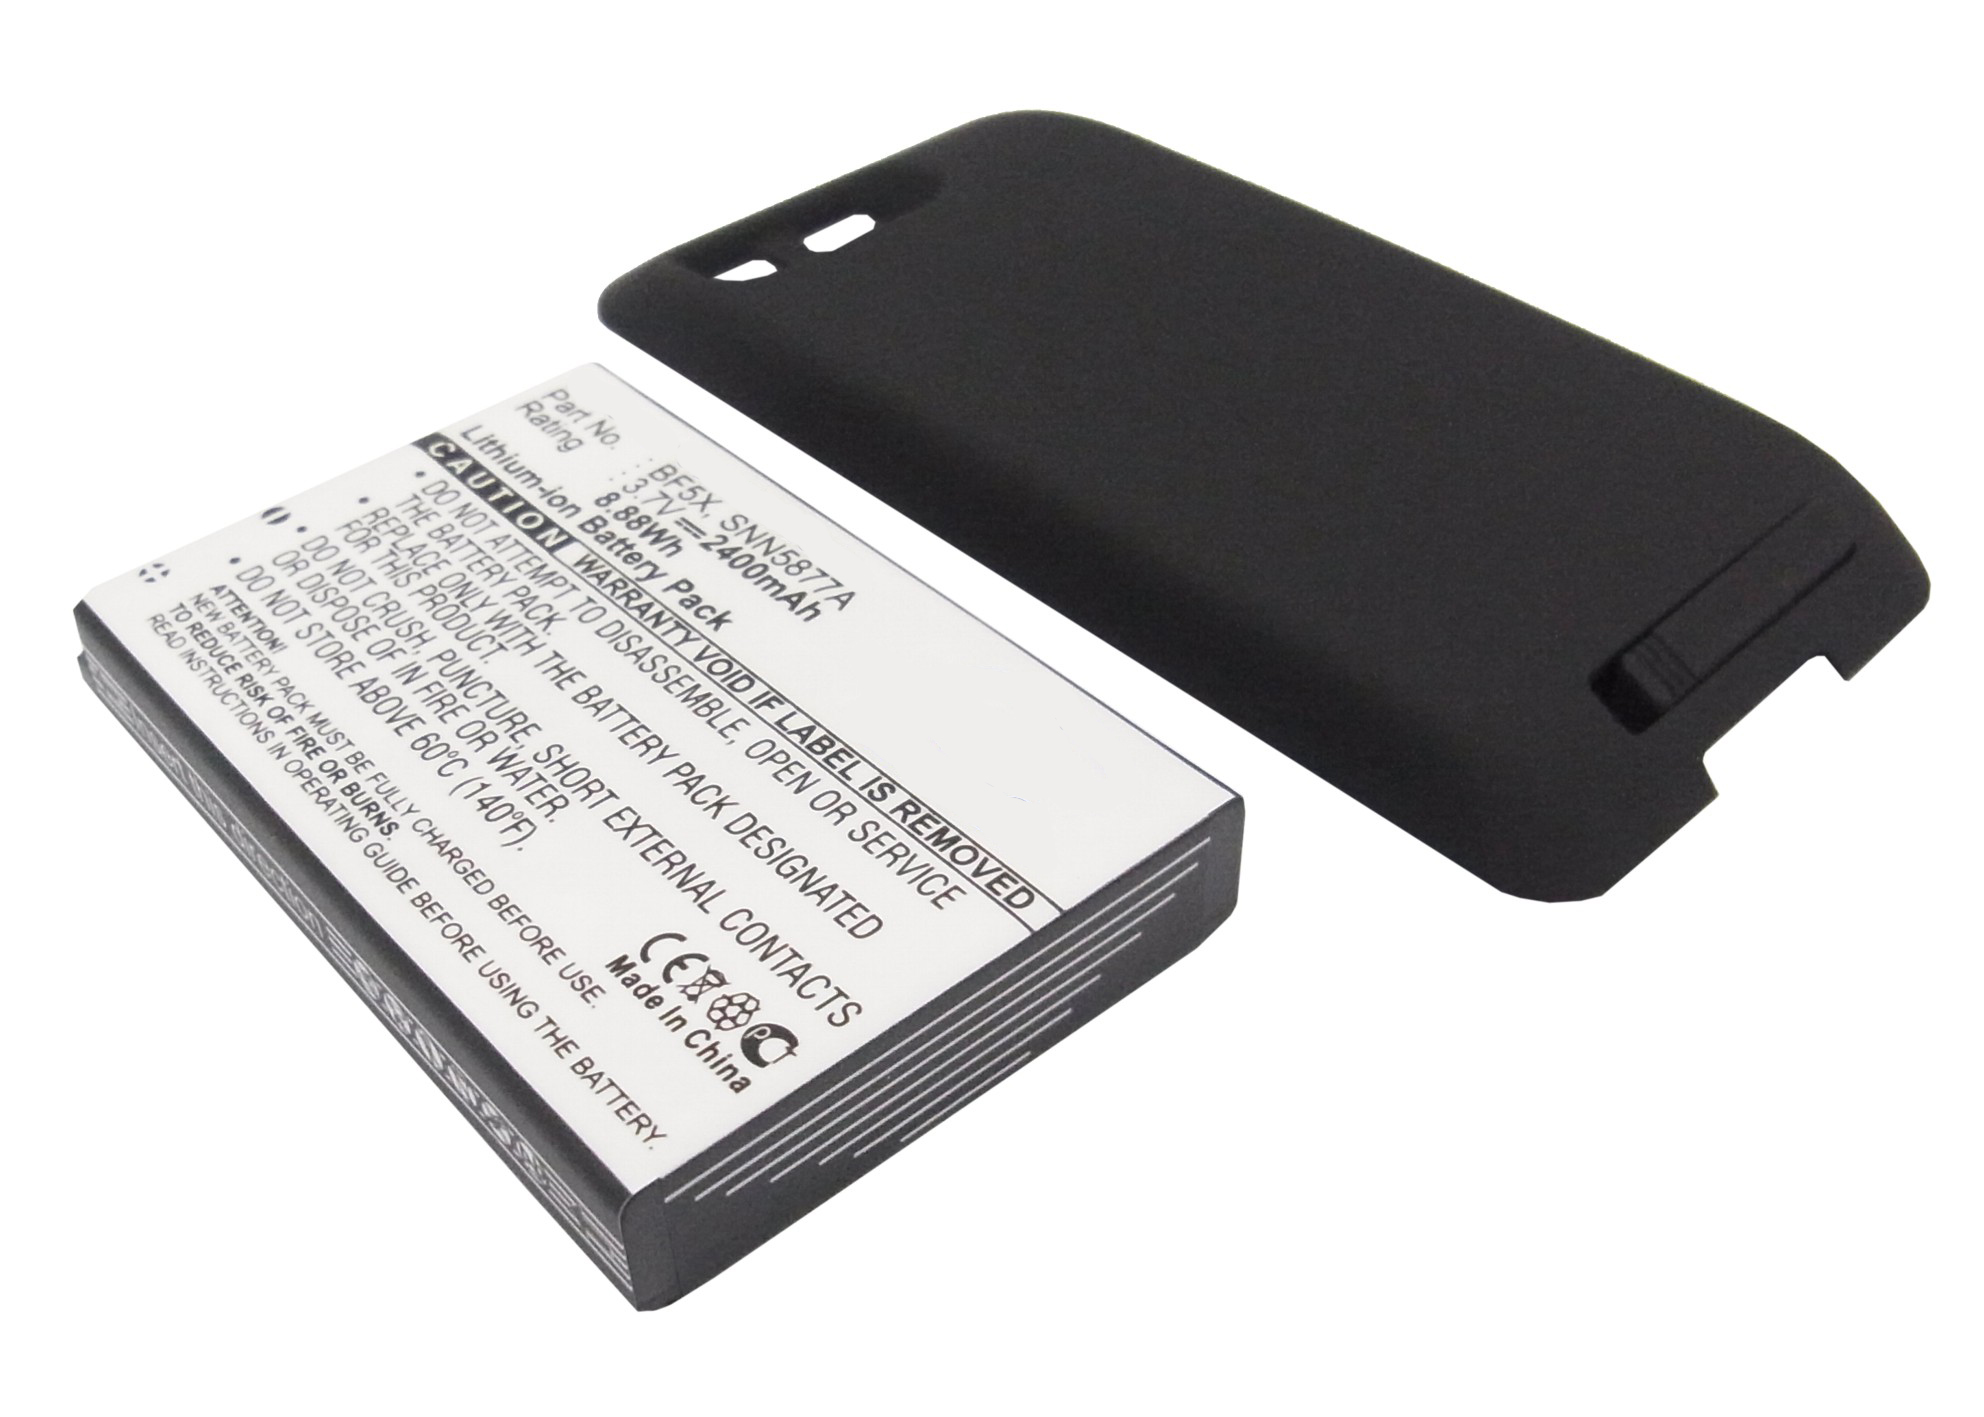 Synergy Digital Cell Phone Battery, Compatiable with Motorola BF5X, SNN5877A Cell Phone Battery (3.7V, Li-ion, 2400mAh)